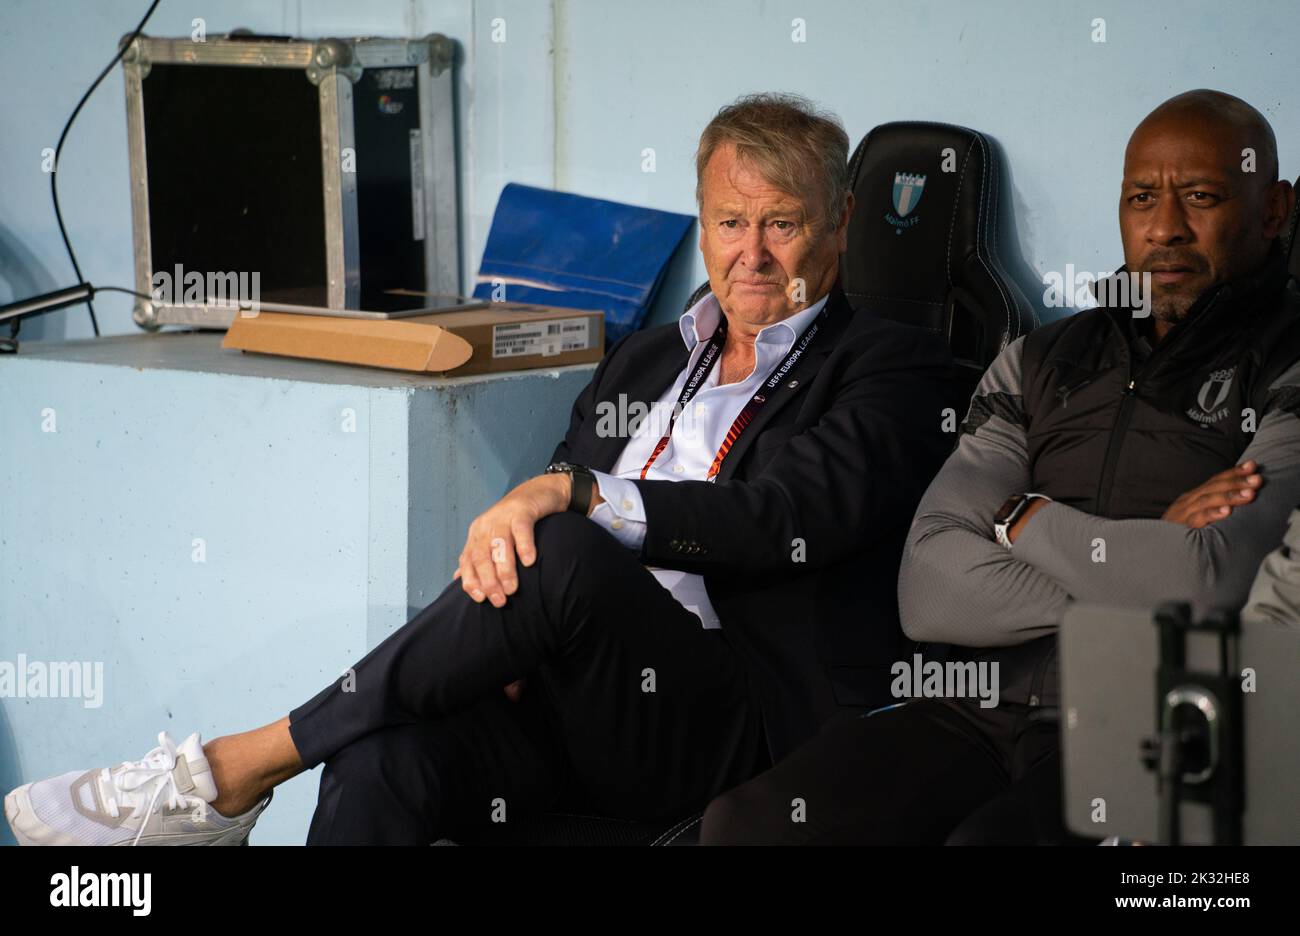 Malmoe, Sweden. 08th, September 2022. Head coach Aage Hareide of Malmö FF seen during the UEFA Europa League match between Malmö FF and Braga at Eleda Stadion in Malmö. (Photo credit: Gonzales Photo - Joe Miller). Stock Photo